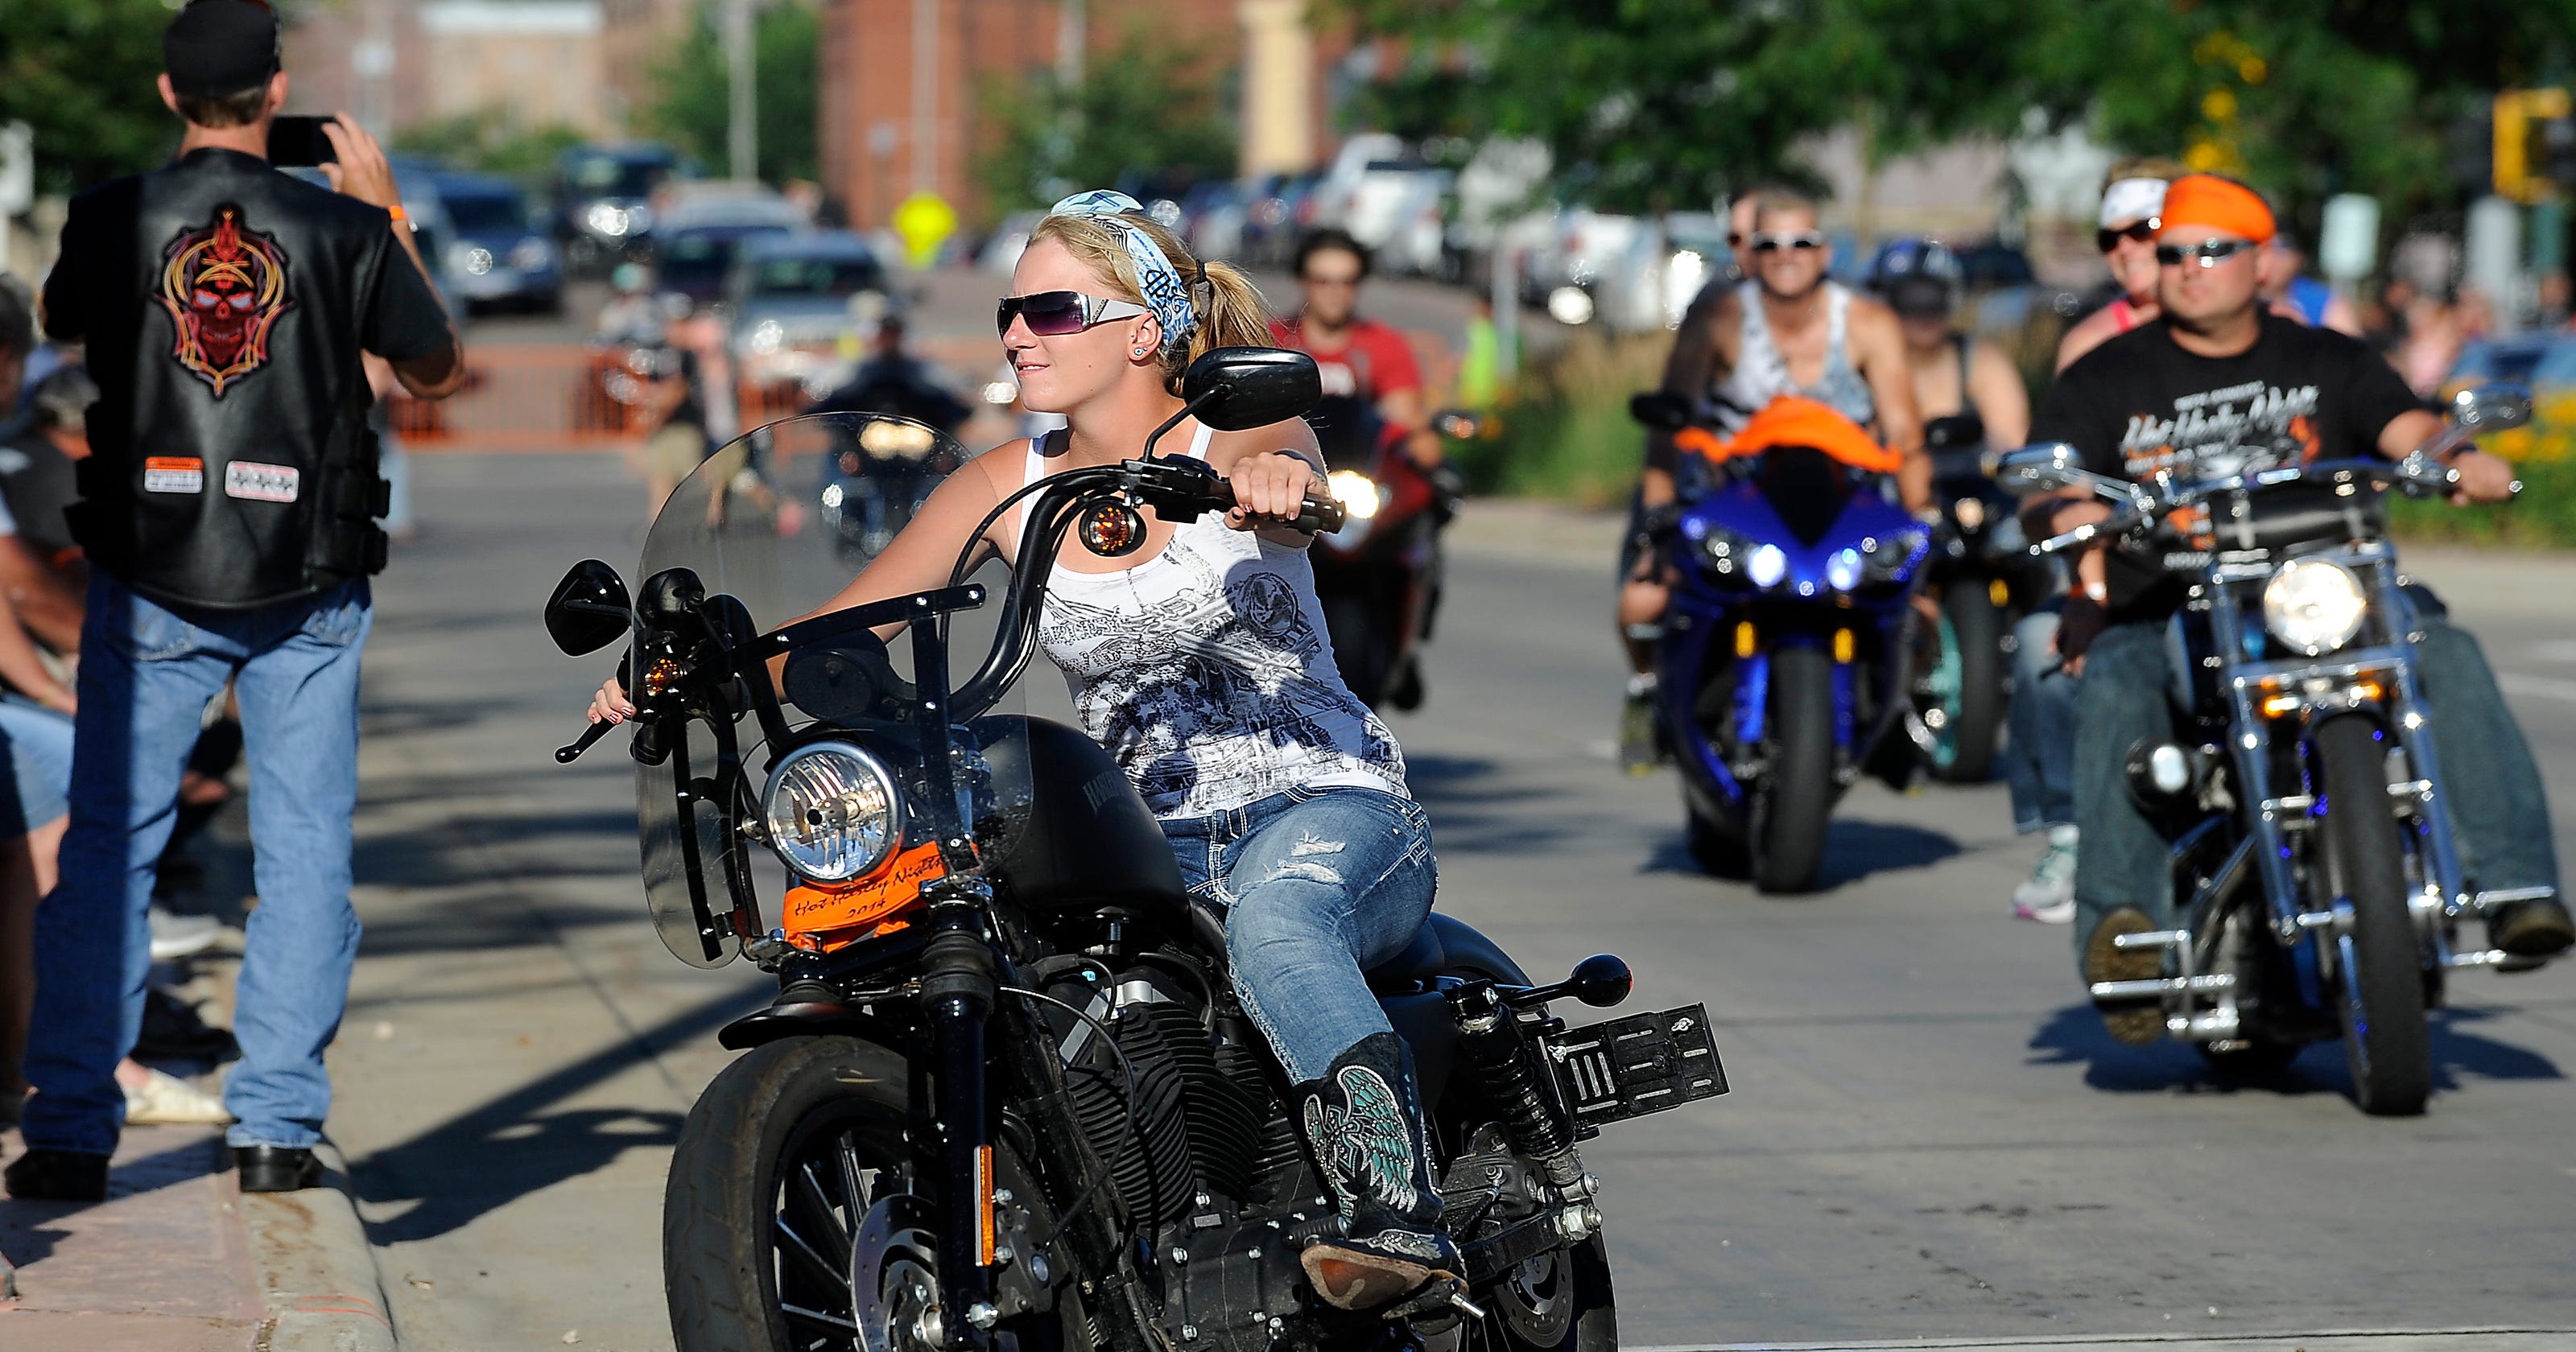 7 Hot Harley Nights events you won't want to miss this week